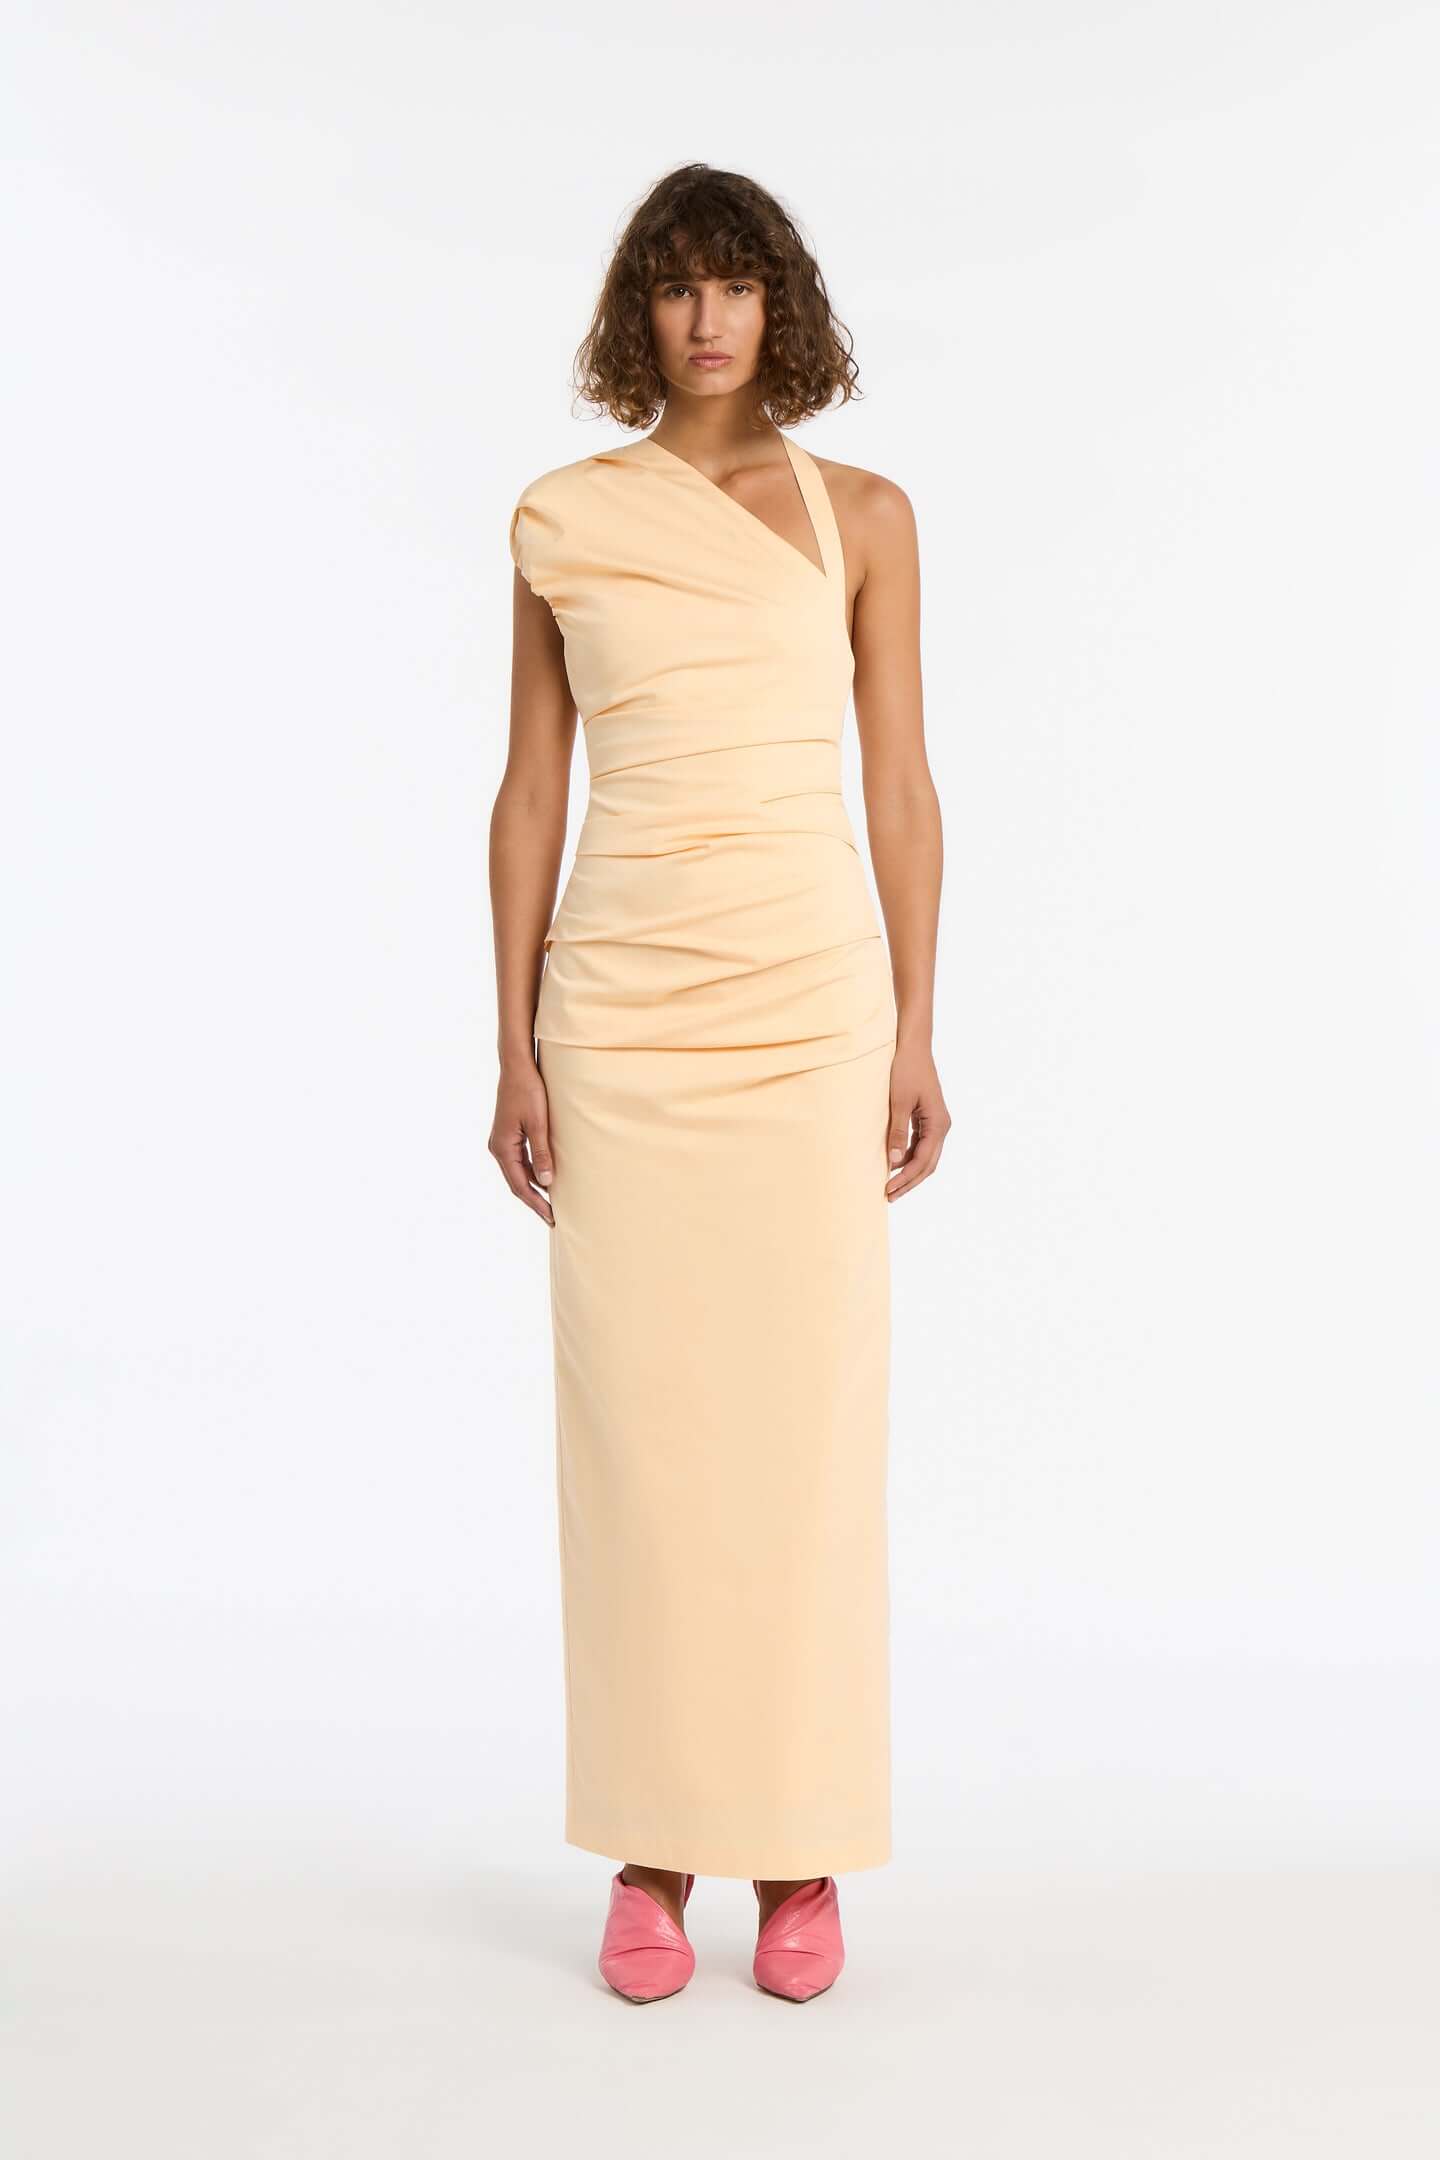 SIR Giacomo Gathered Gown in Butter available at TNT The New Trend Australia. Free shipping on orders over $300 AUD.